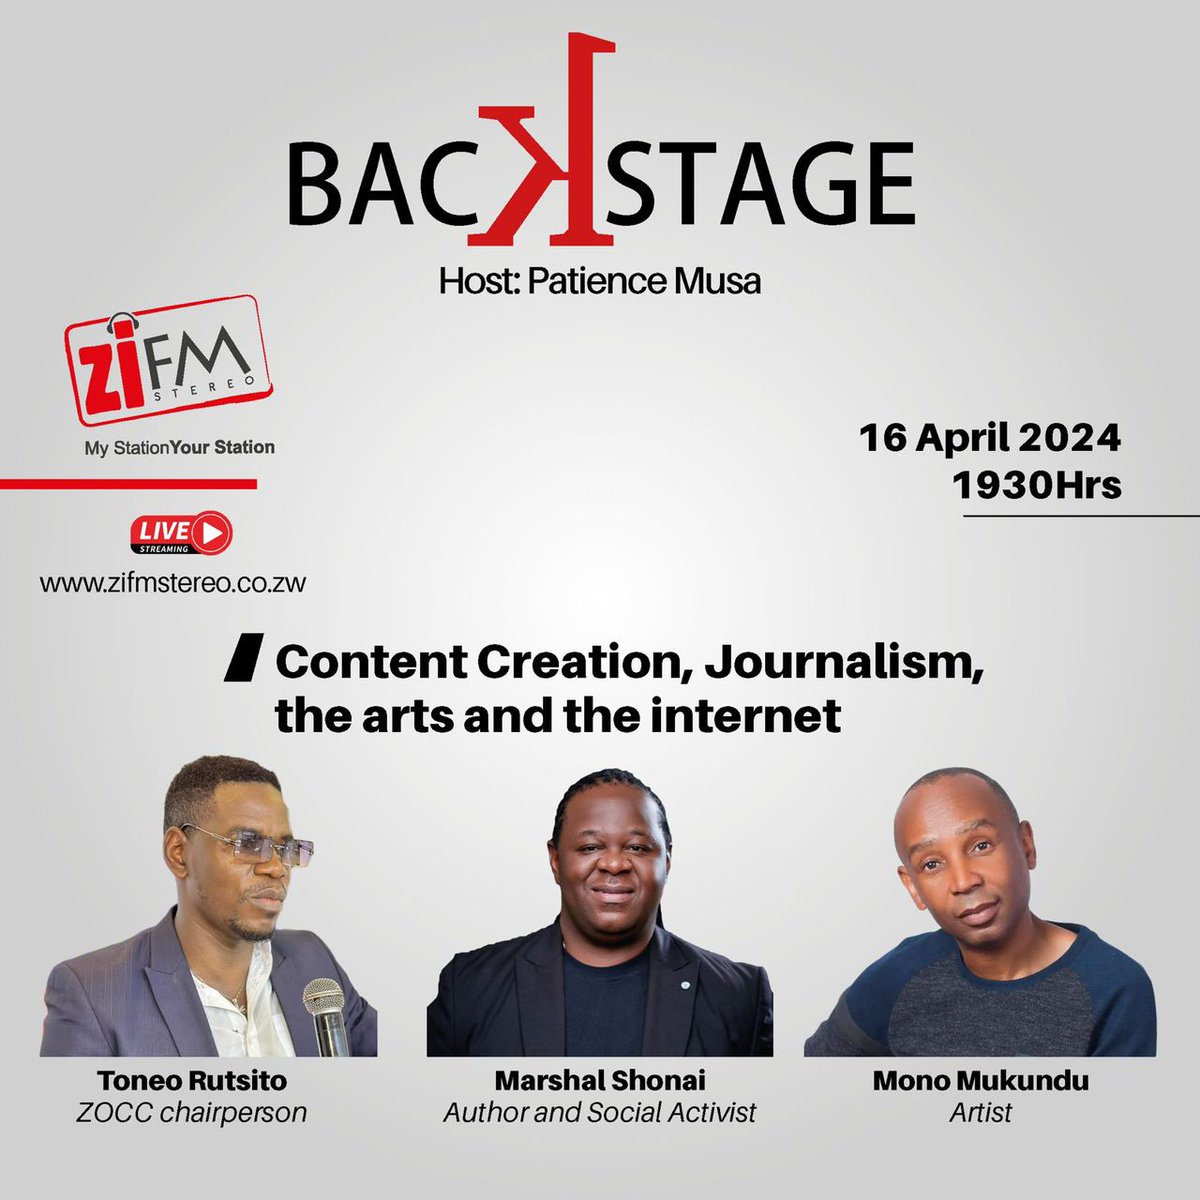 Tonight, Marshal Shonhai, Toneo Rutsito, and I will be discussing content creation on ZiFm with host Patience Musa. Tune in...